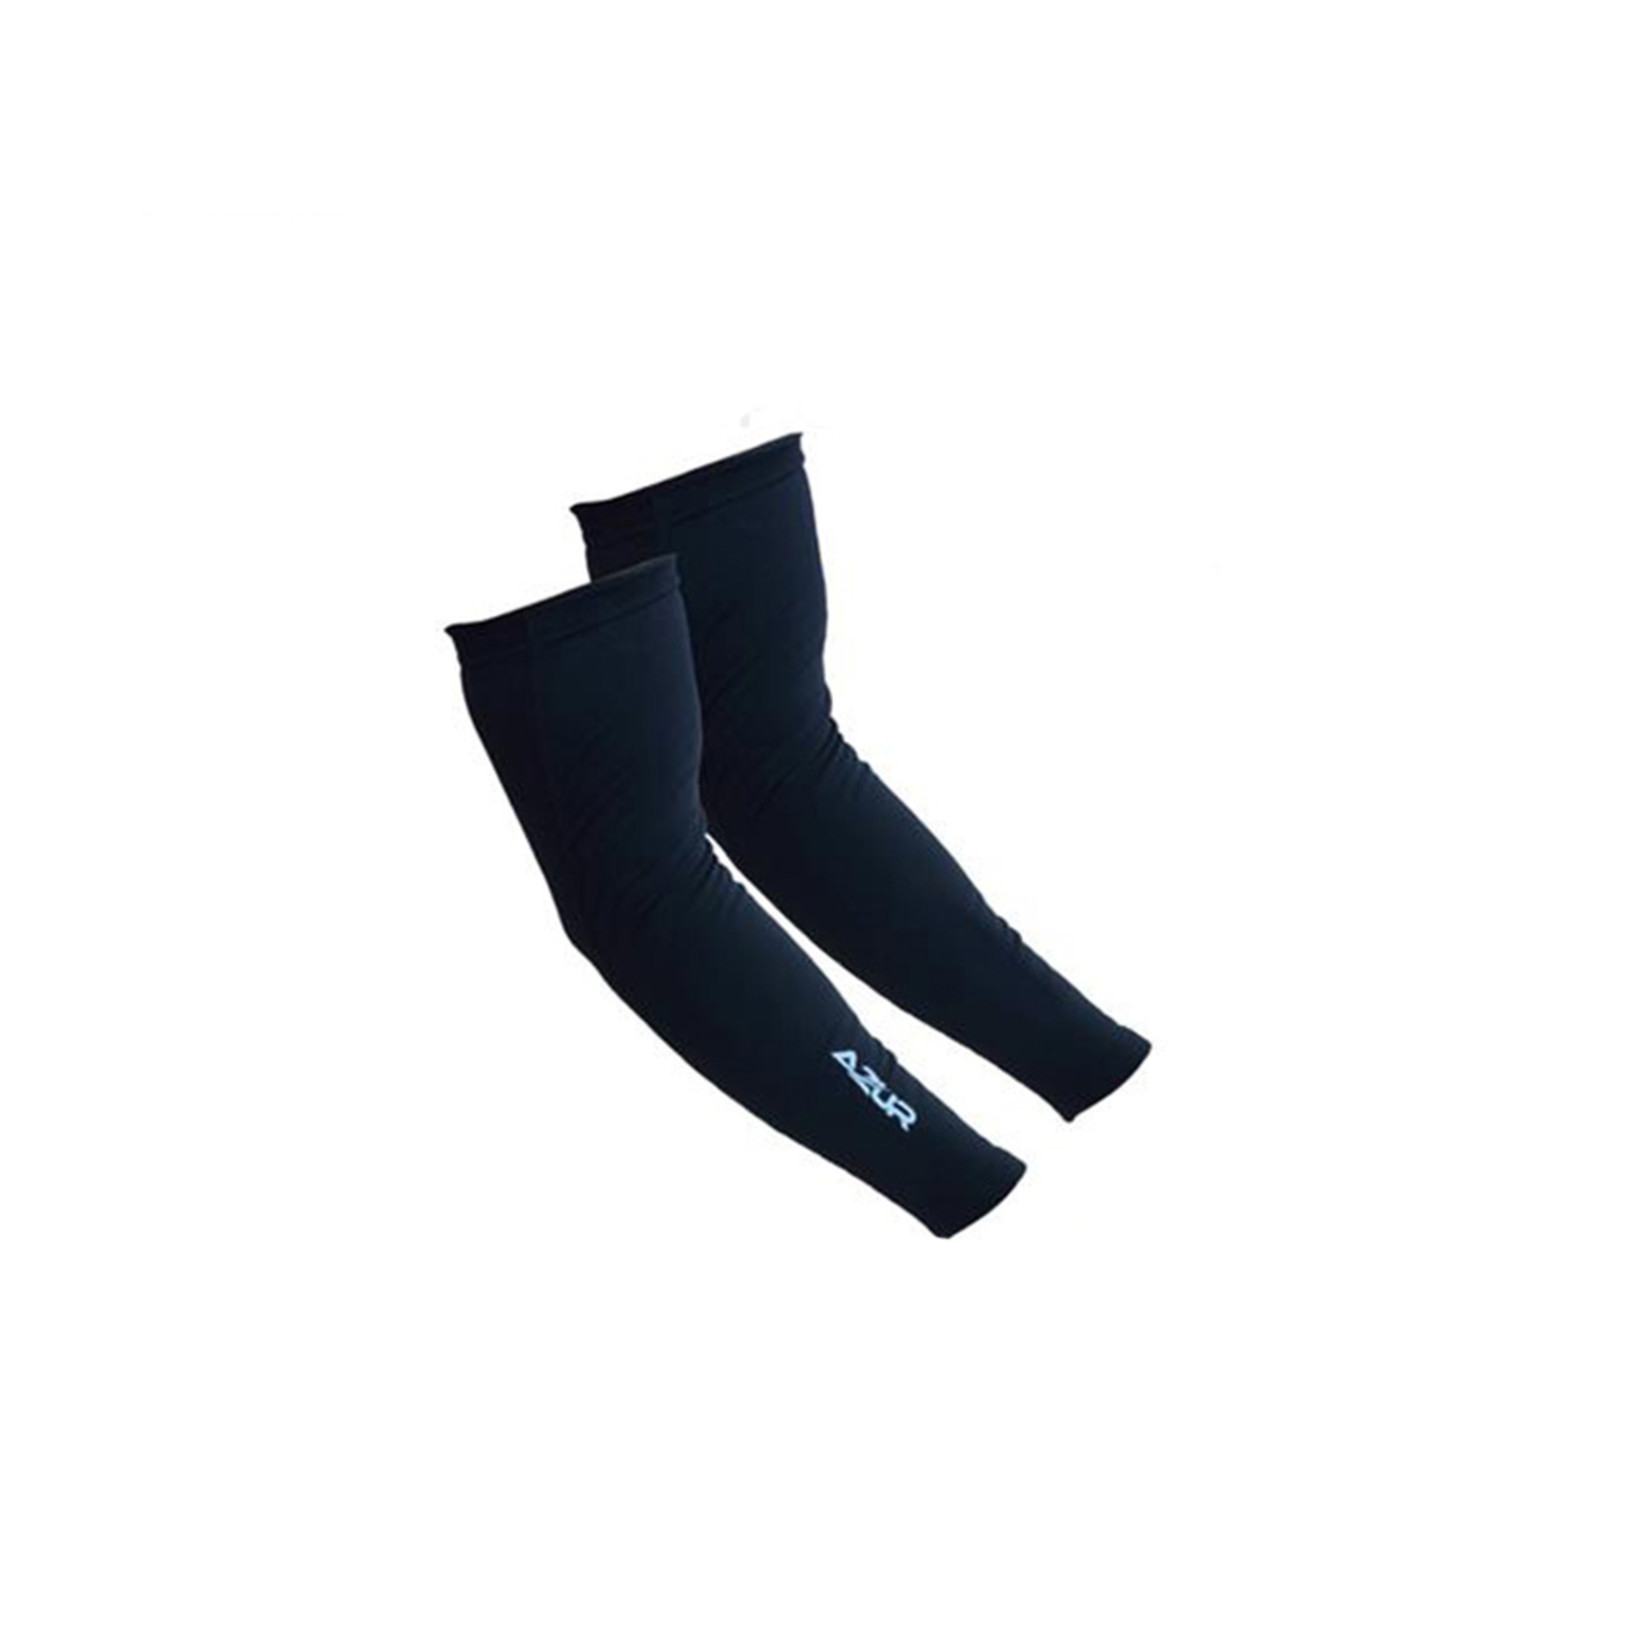 Azur Azur Arm Warmers - Made From Italian Thermolite Fleece - Black - Small